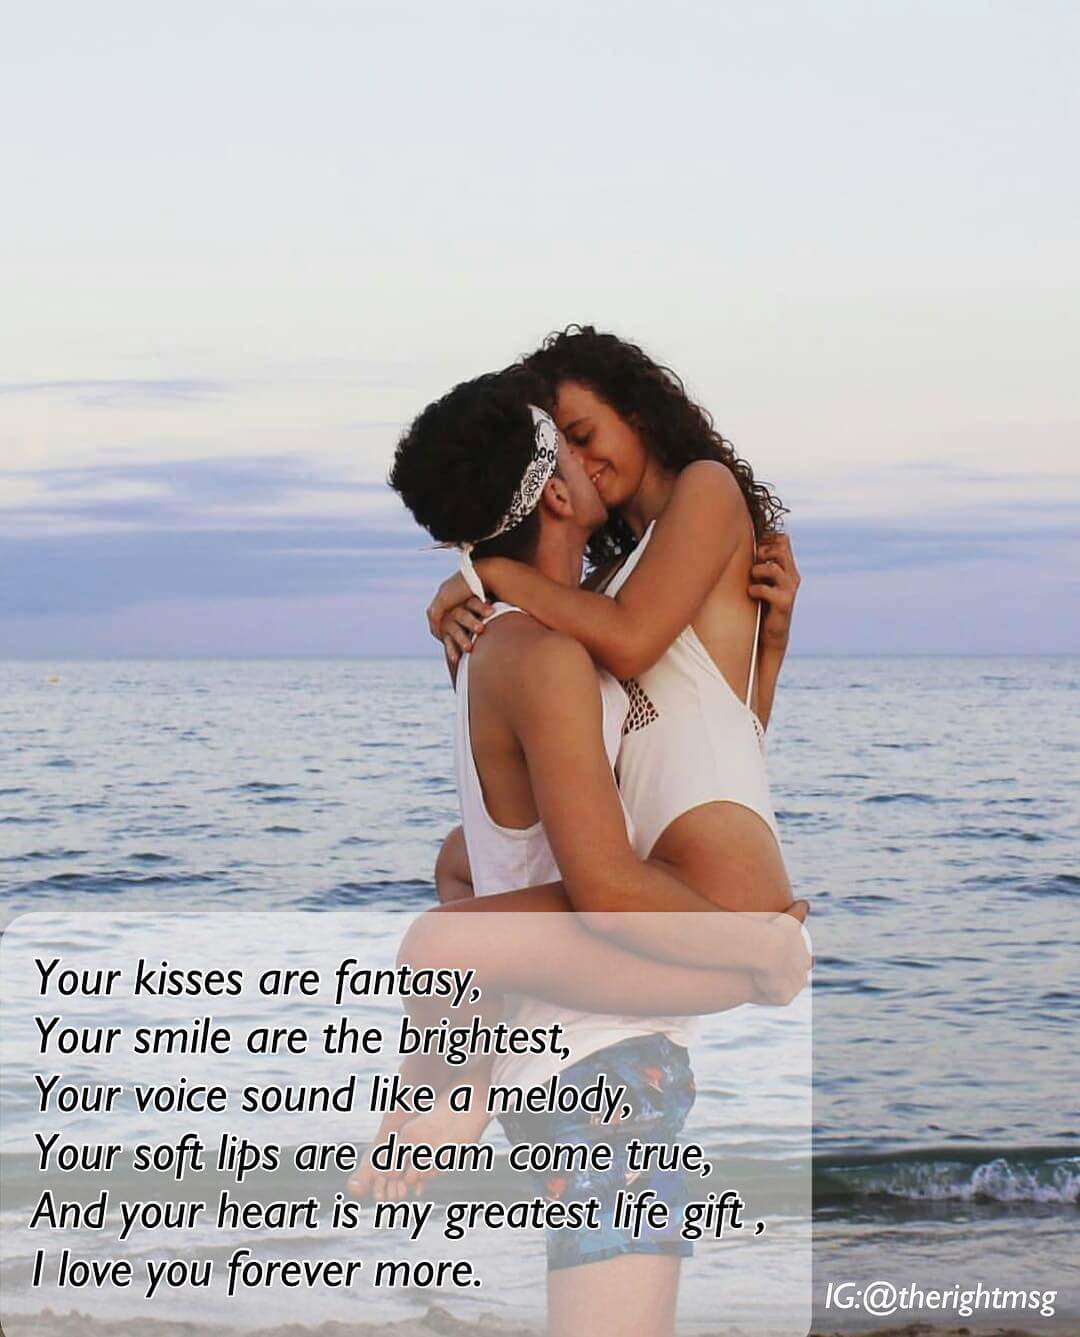 Romantic love poems most 8 Most